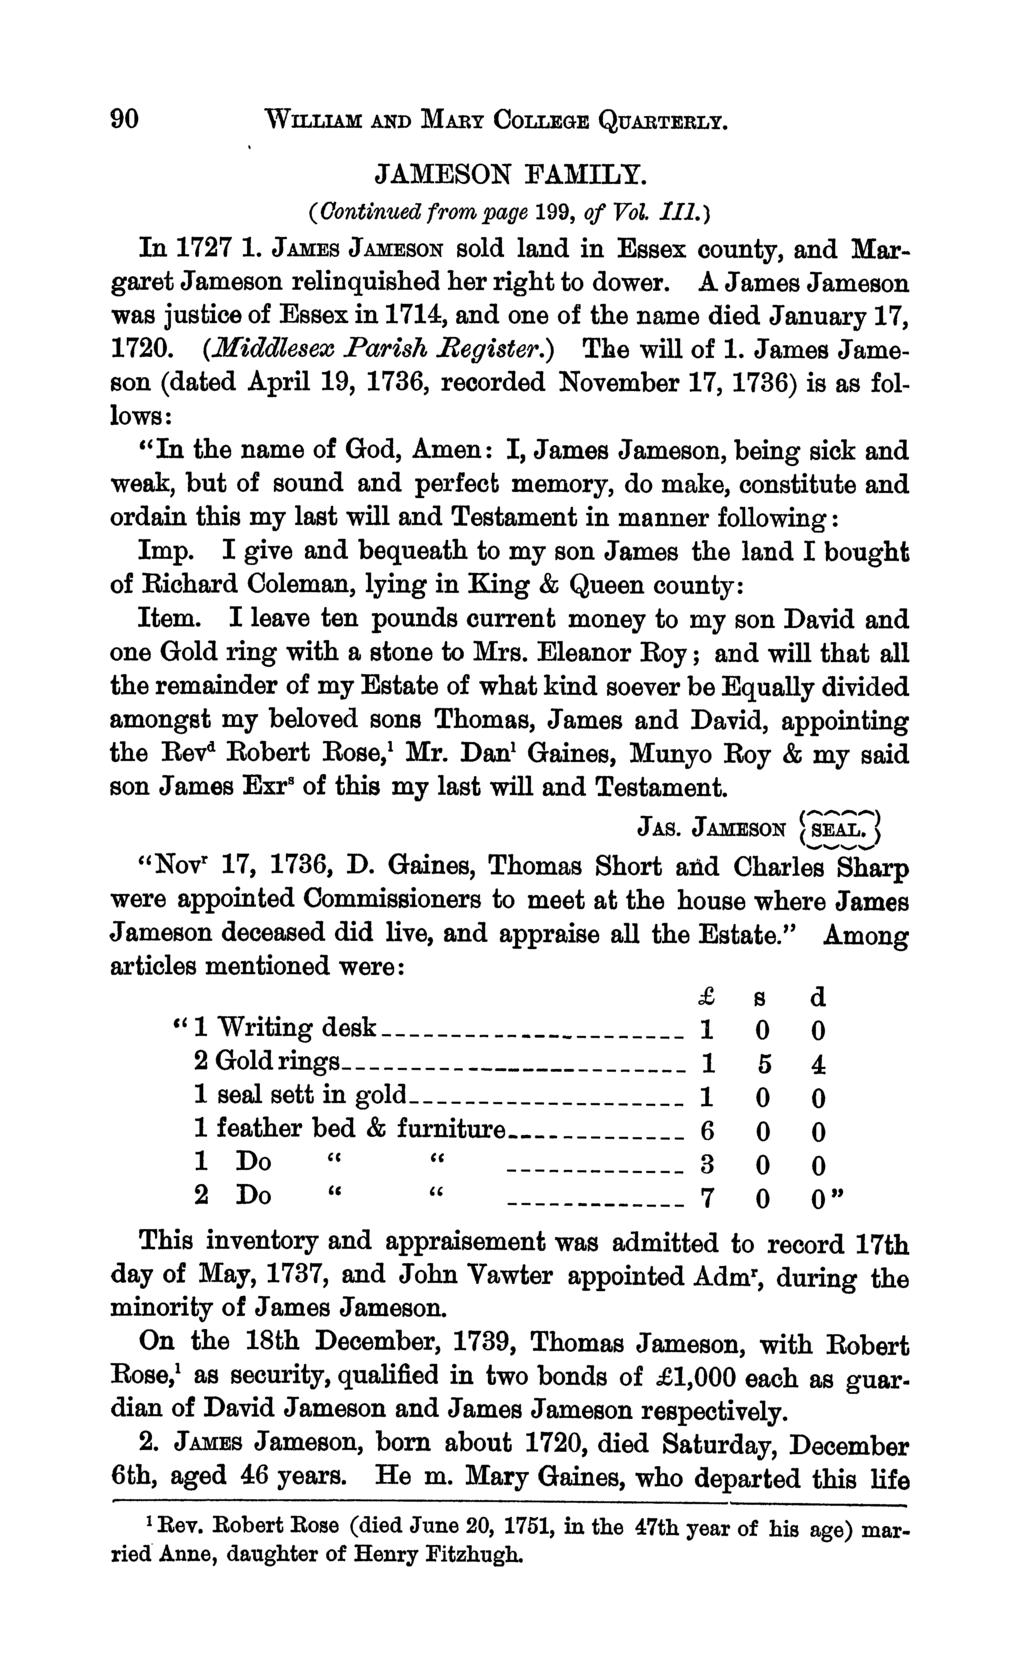 90 WILLA AND MARY COLLEGE QUARTERLY. JAMESON FAMILY. (Continued from page 199, of VoL. IIl.) In 1727 1. JAMES JAMESON sold land in Essex county, and Margaret Jameson relinquished her right to dower.